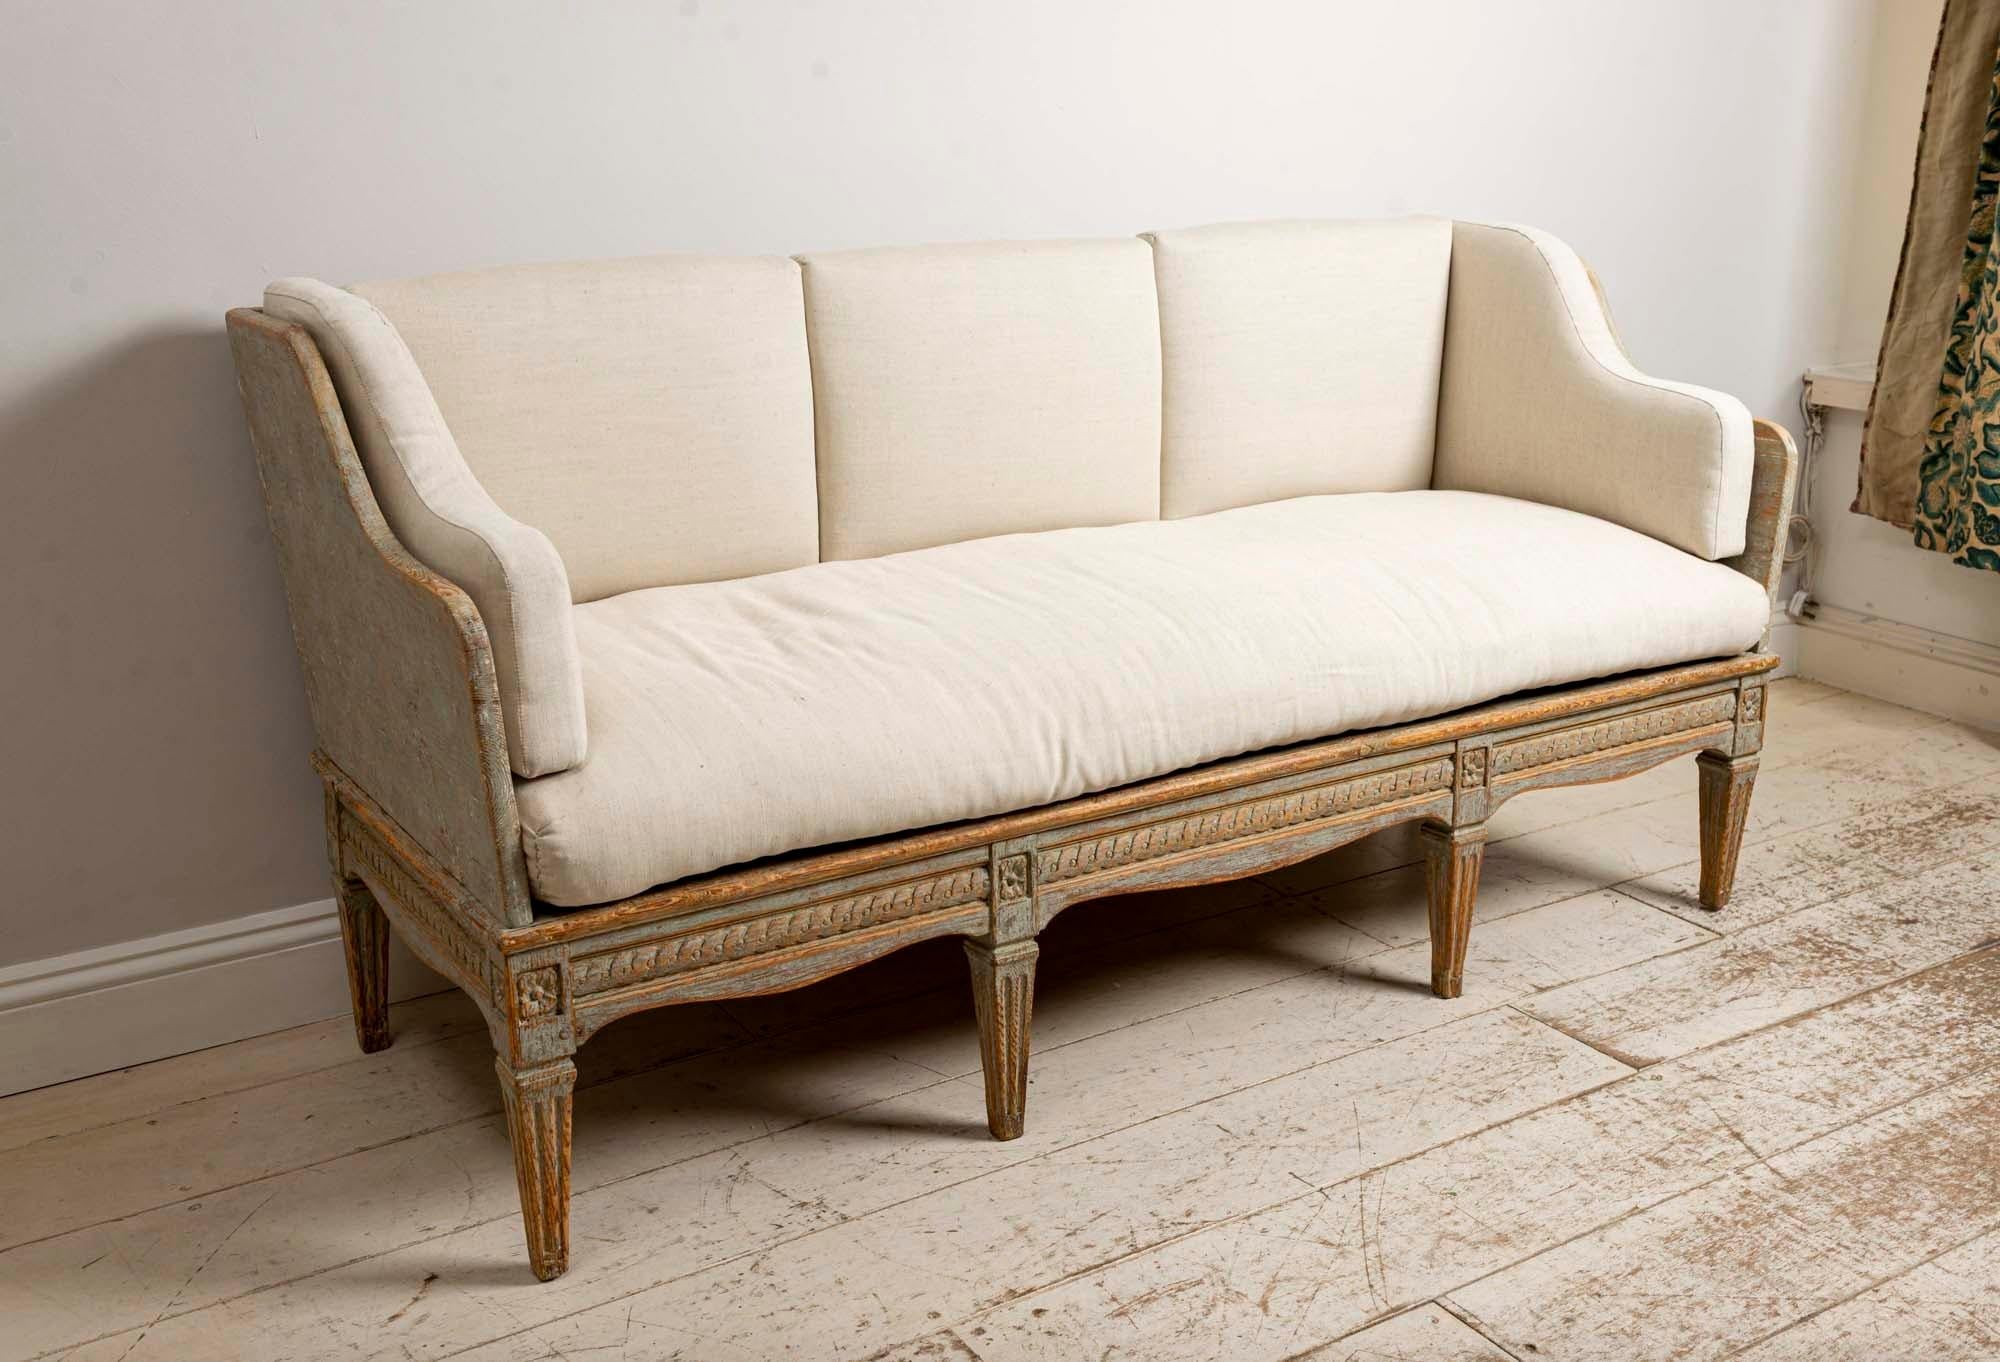 19th century Swedish Gustavian Trag sofa, with a wonderfully decorated front frieze 
Upholstered in a neutral linen fabric.
The sofa is extremely comfortable and can be used in the centre of the room or against a wall. 
In very good condition.